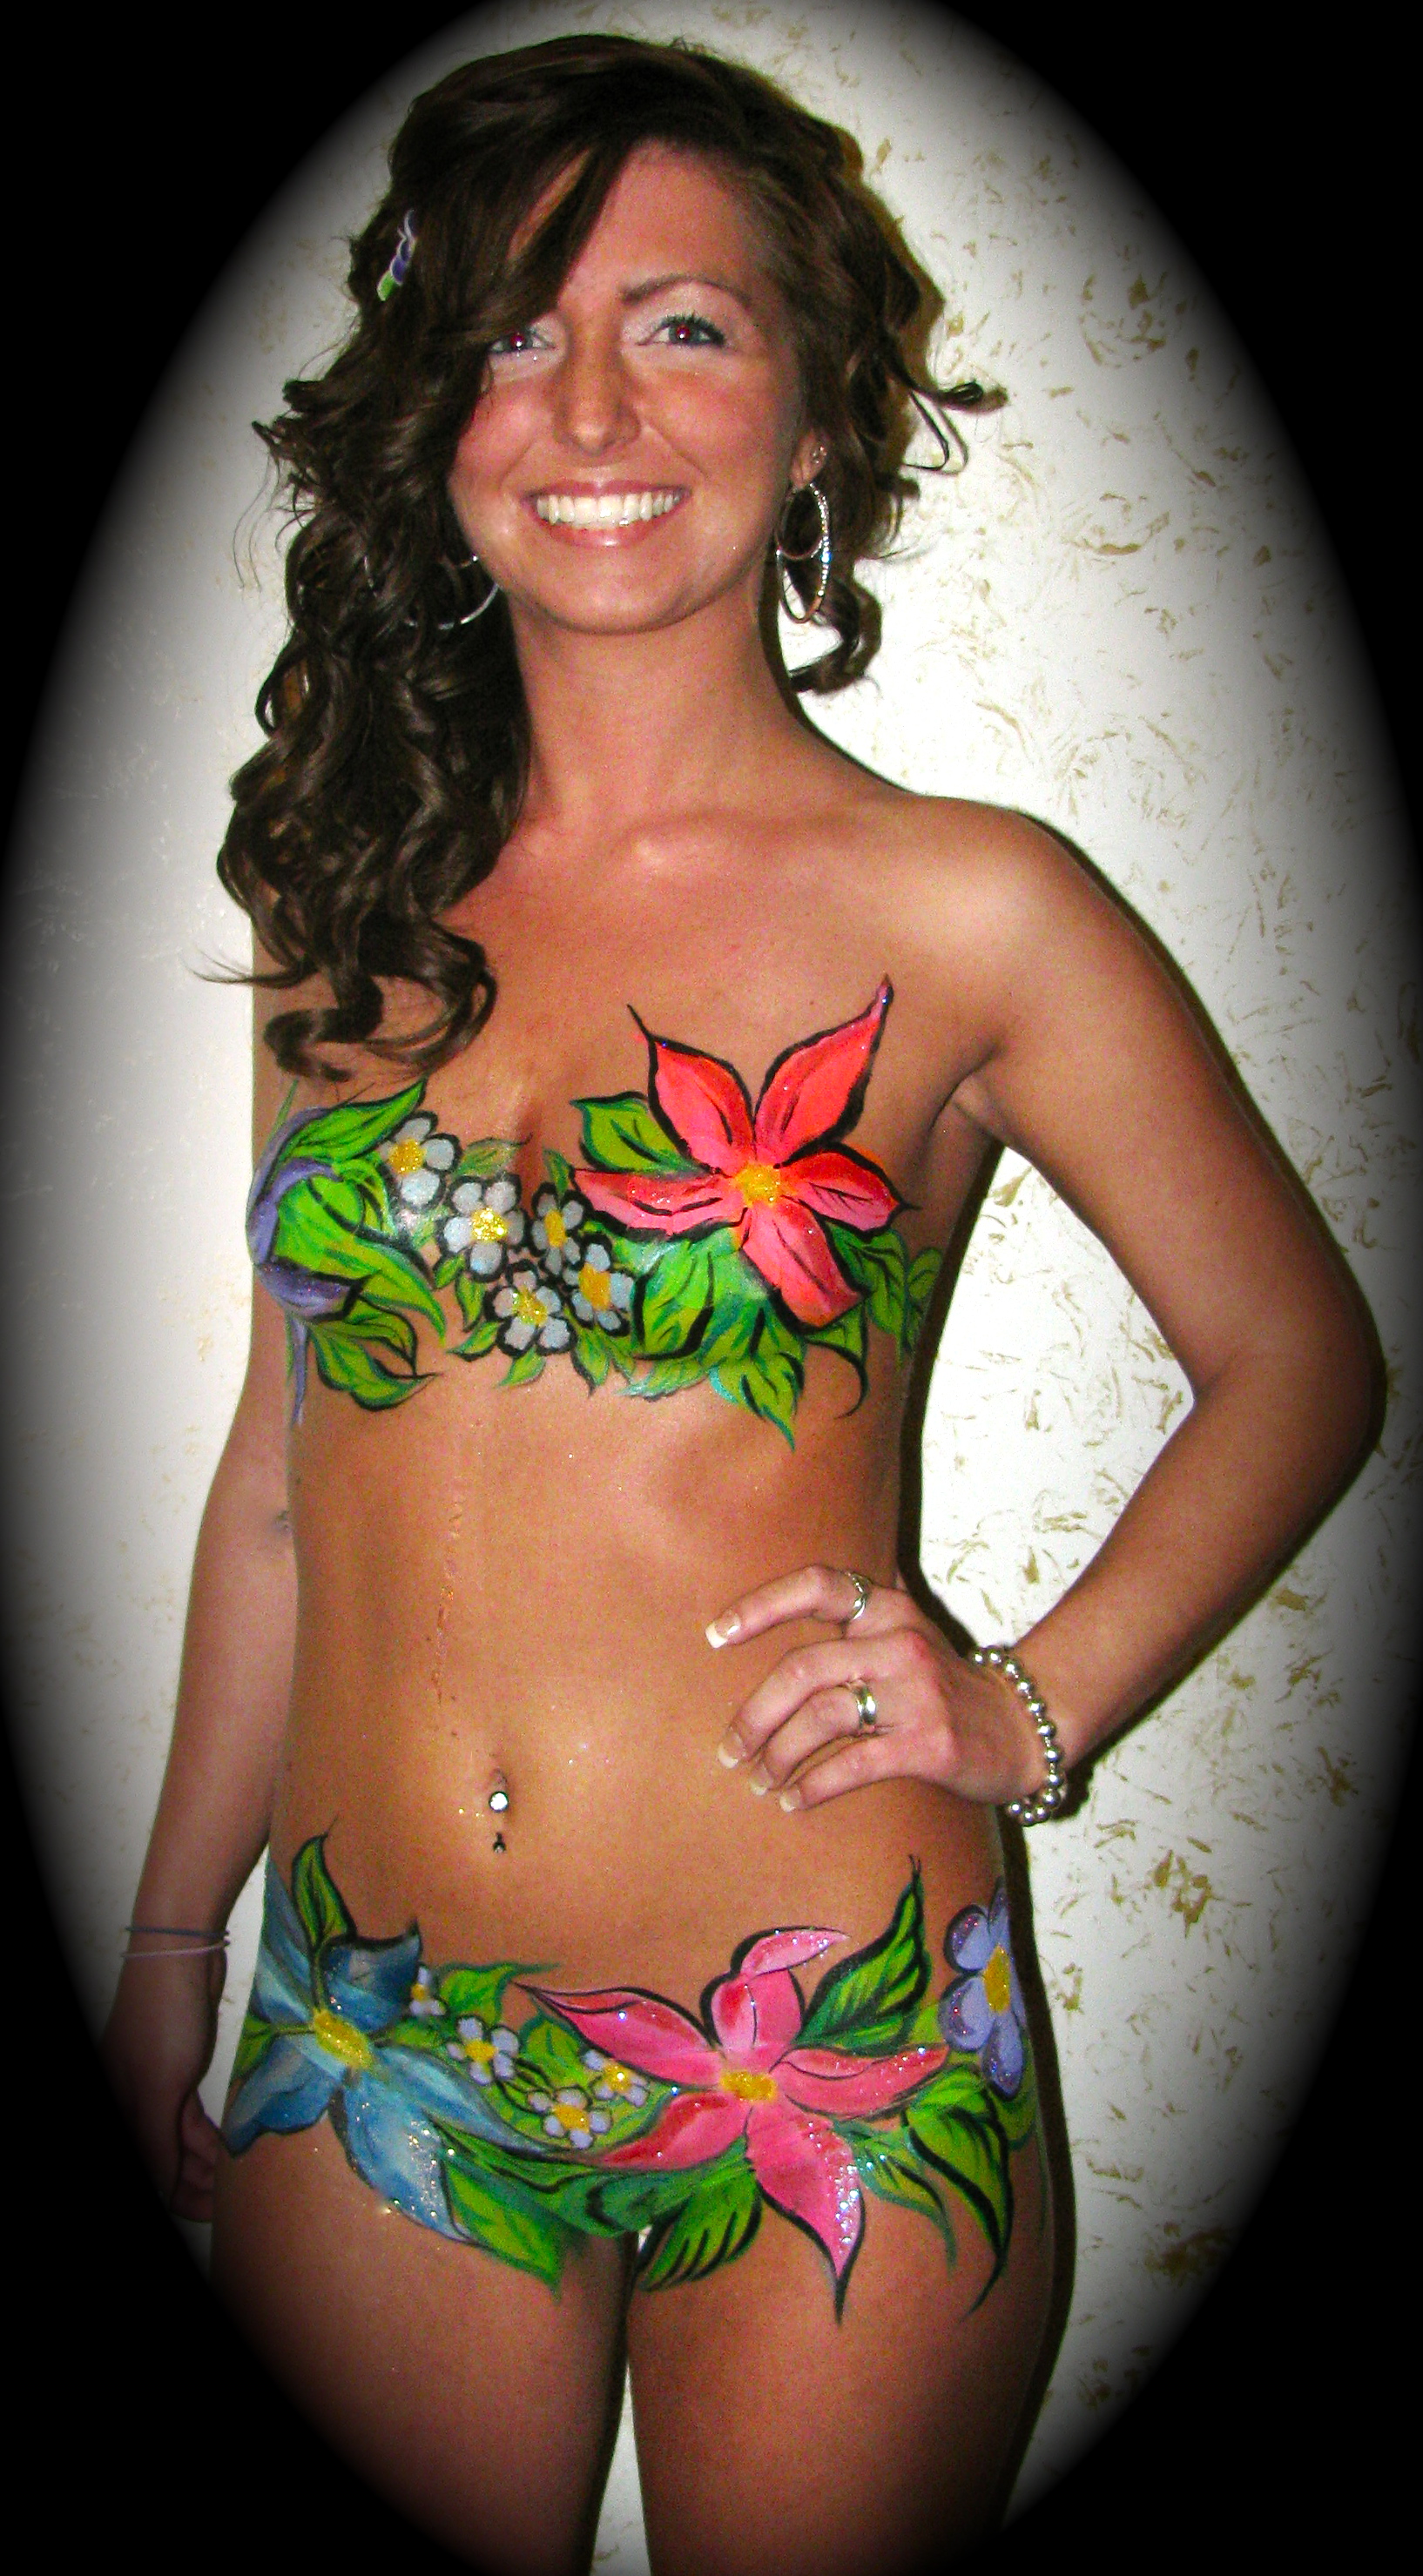 Painted Bikini | Body Painting Pictures